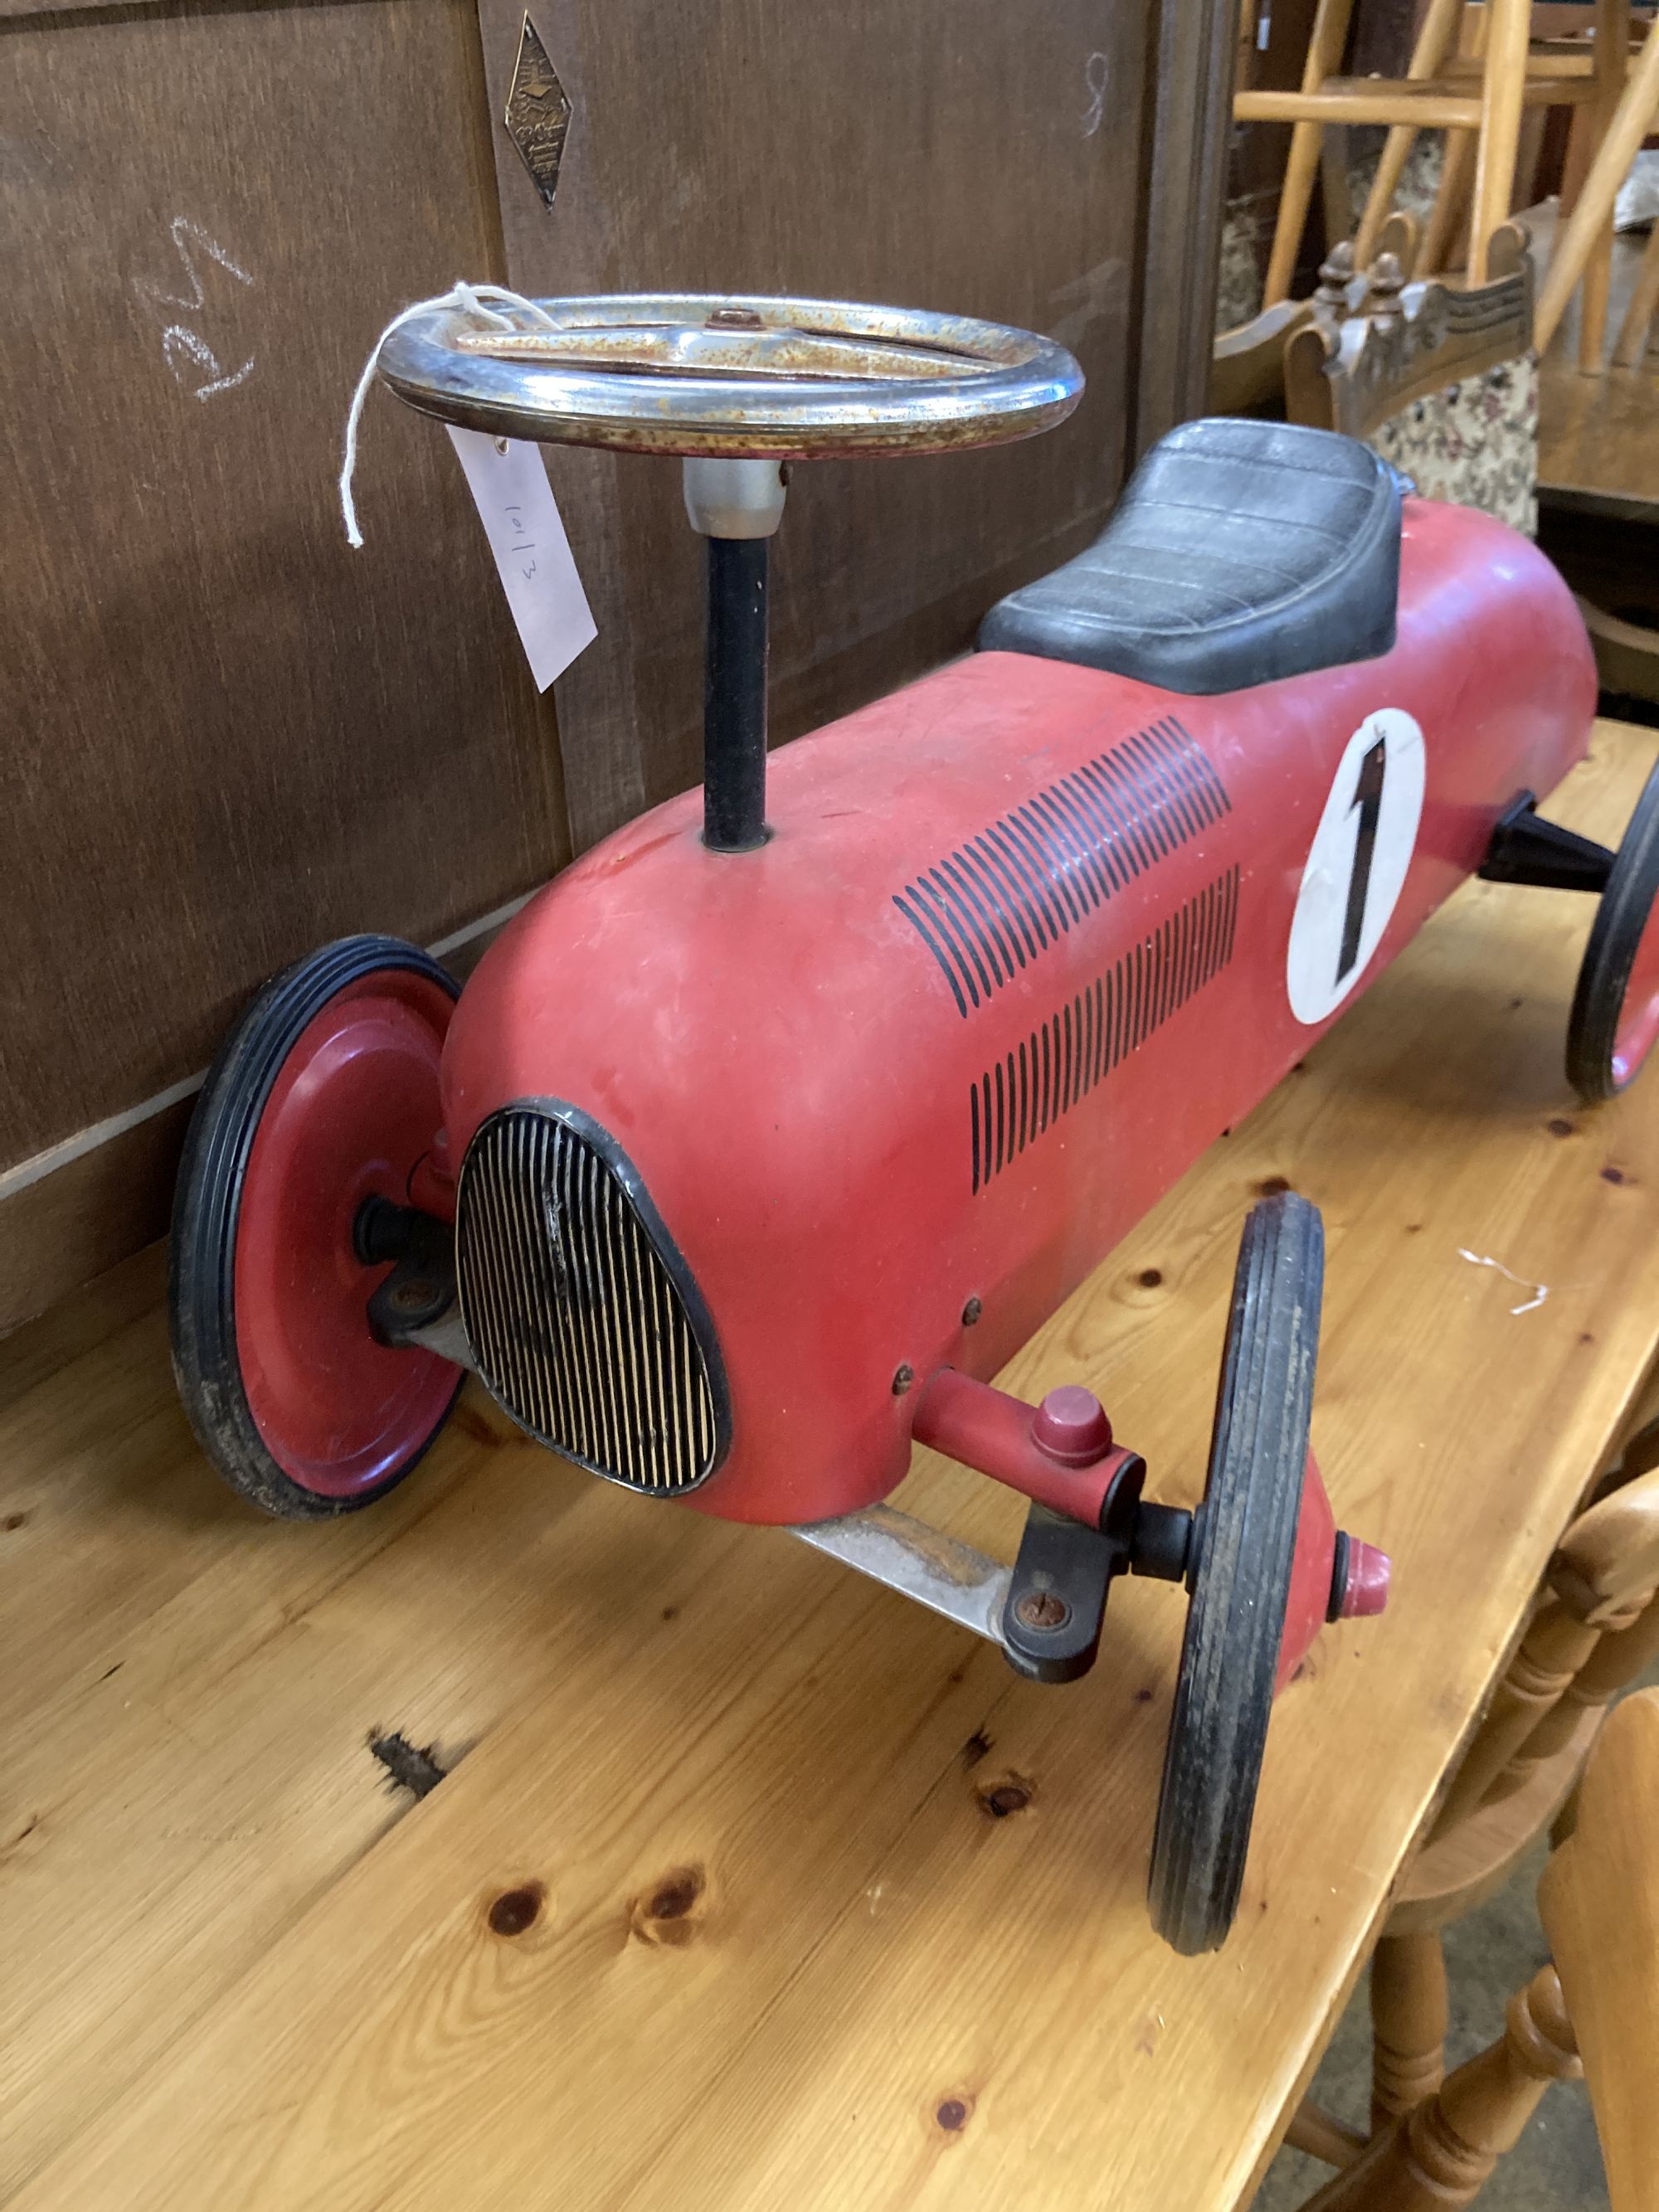 A child's vintage style painted metal sit on toy racing car, length 76cm